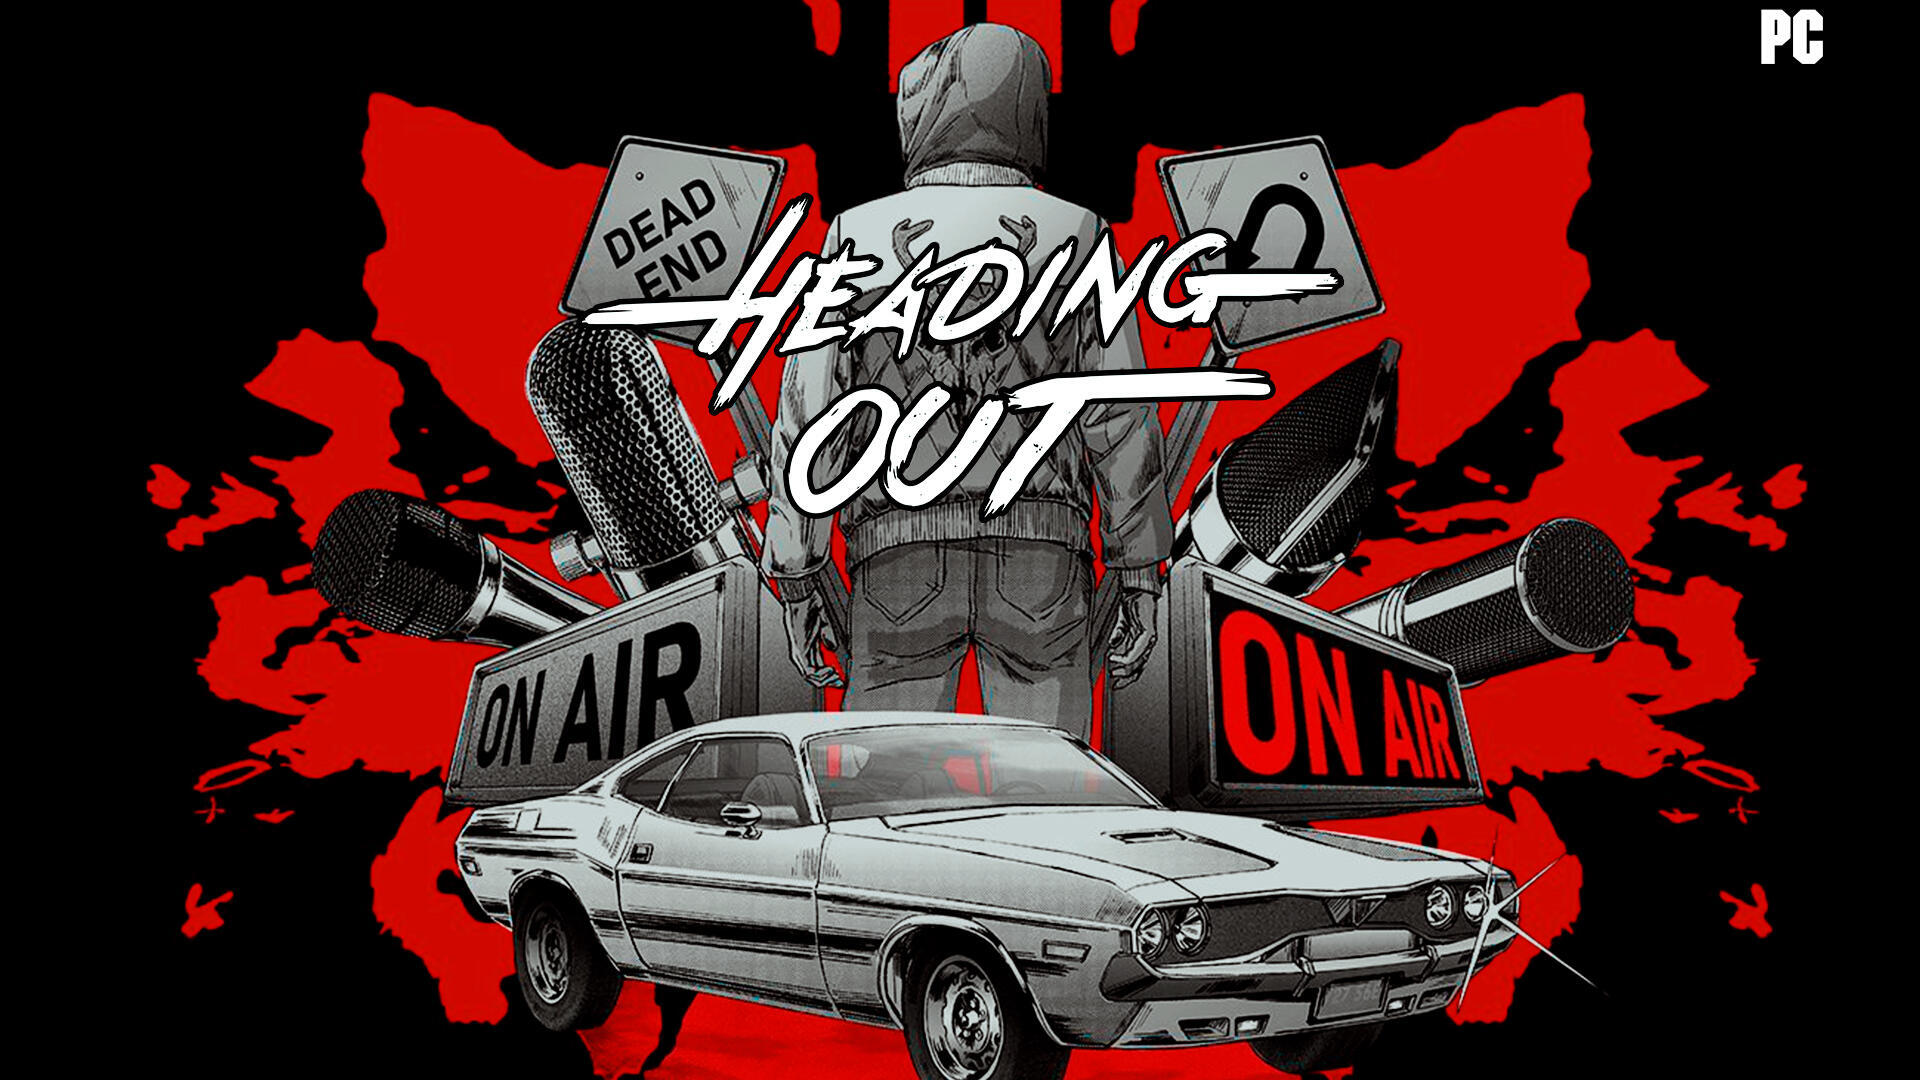 Heading Out - A Narrative Road Movie Racing Game